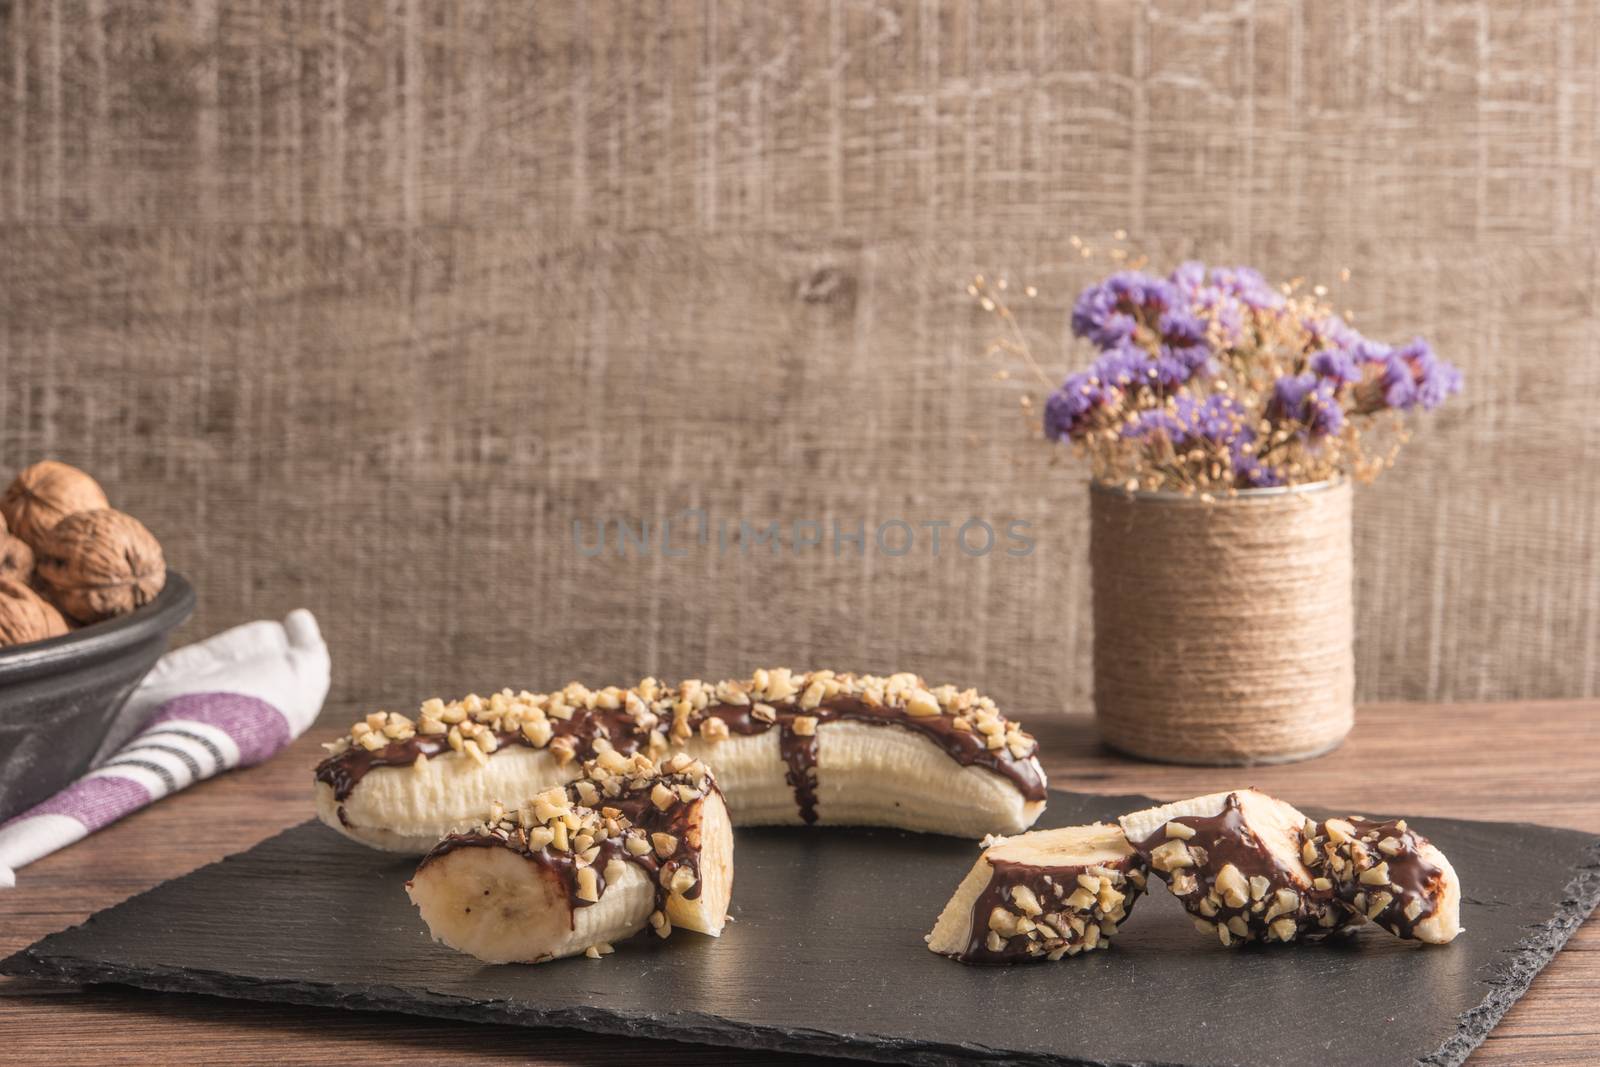 Fresh banana with melted chocolate and nuts coverage on slate